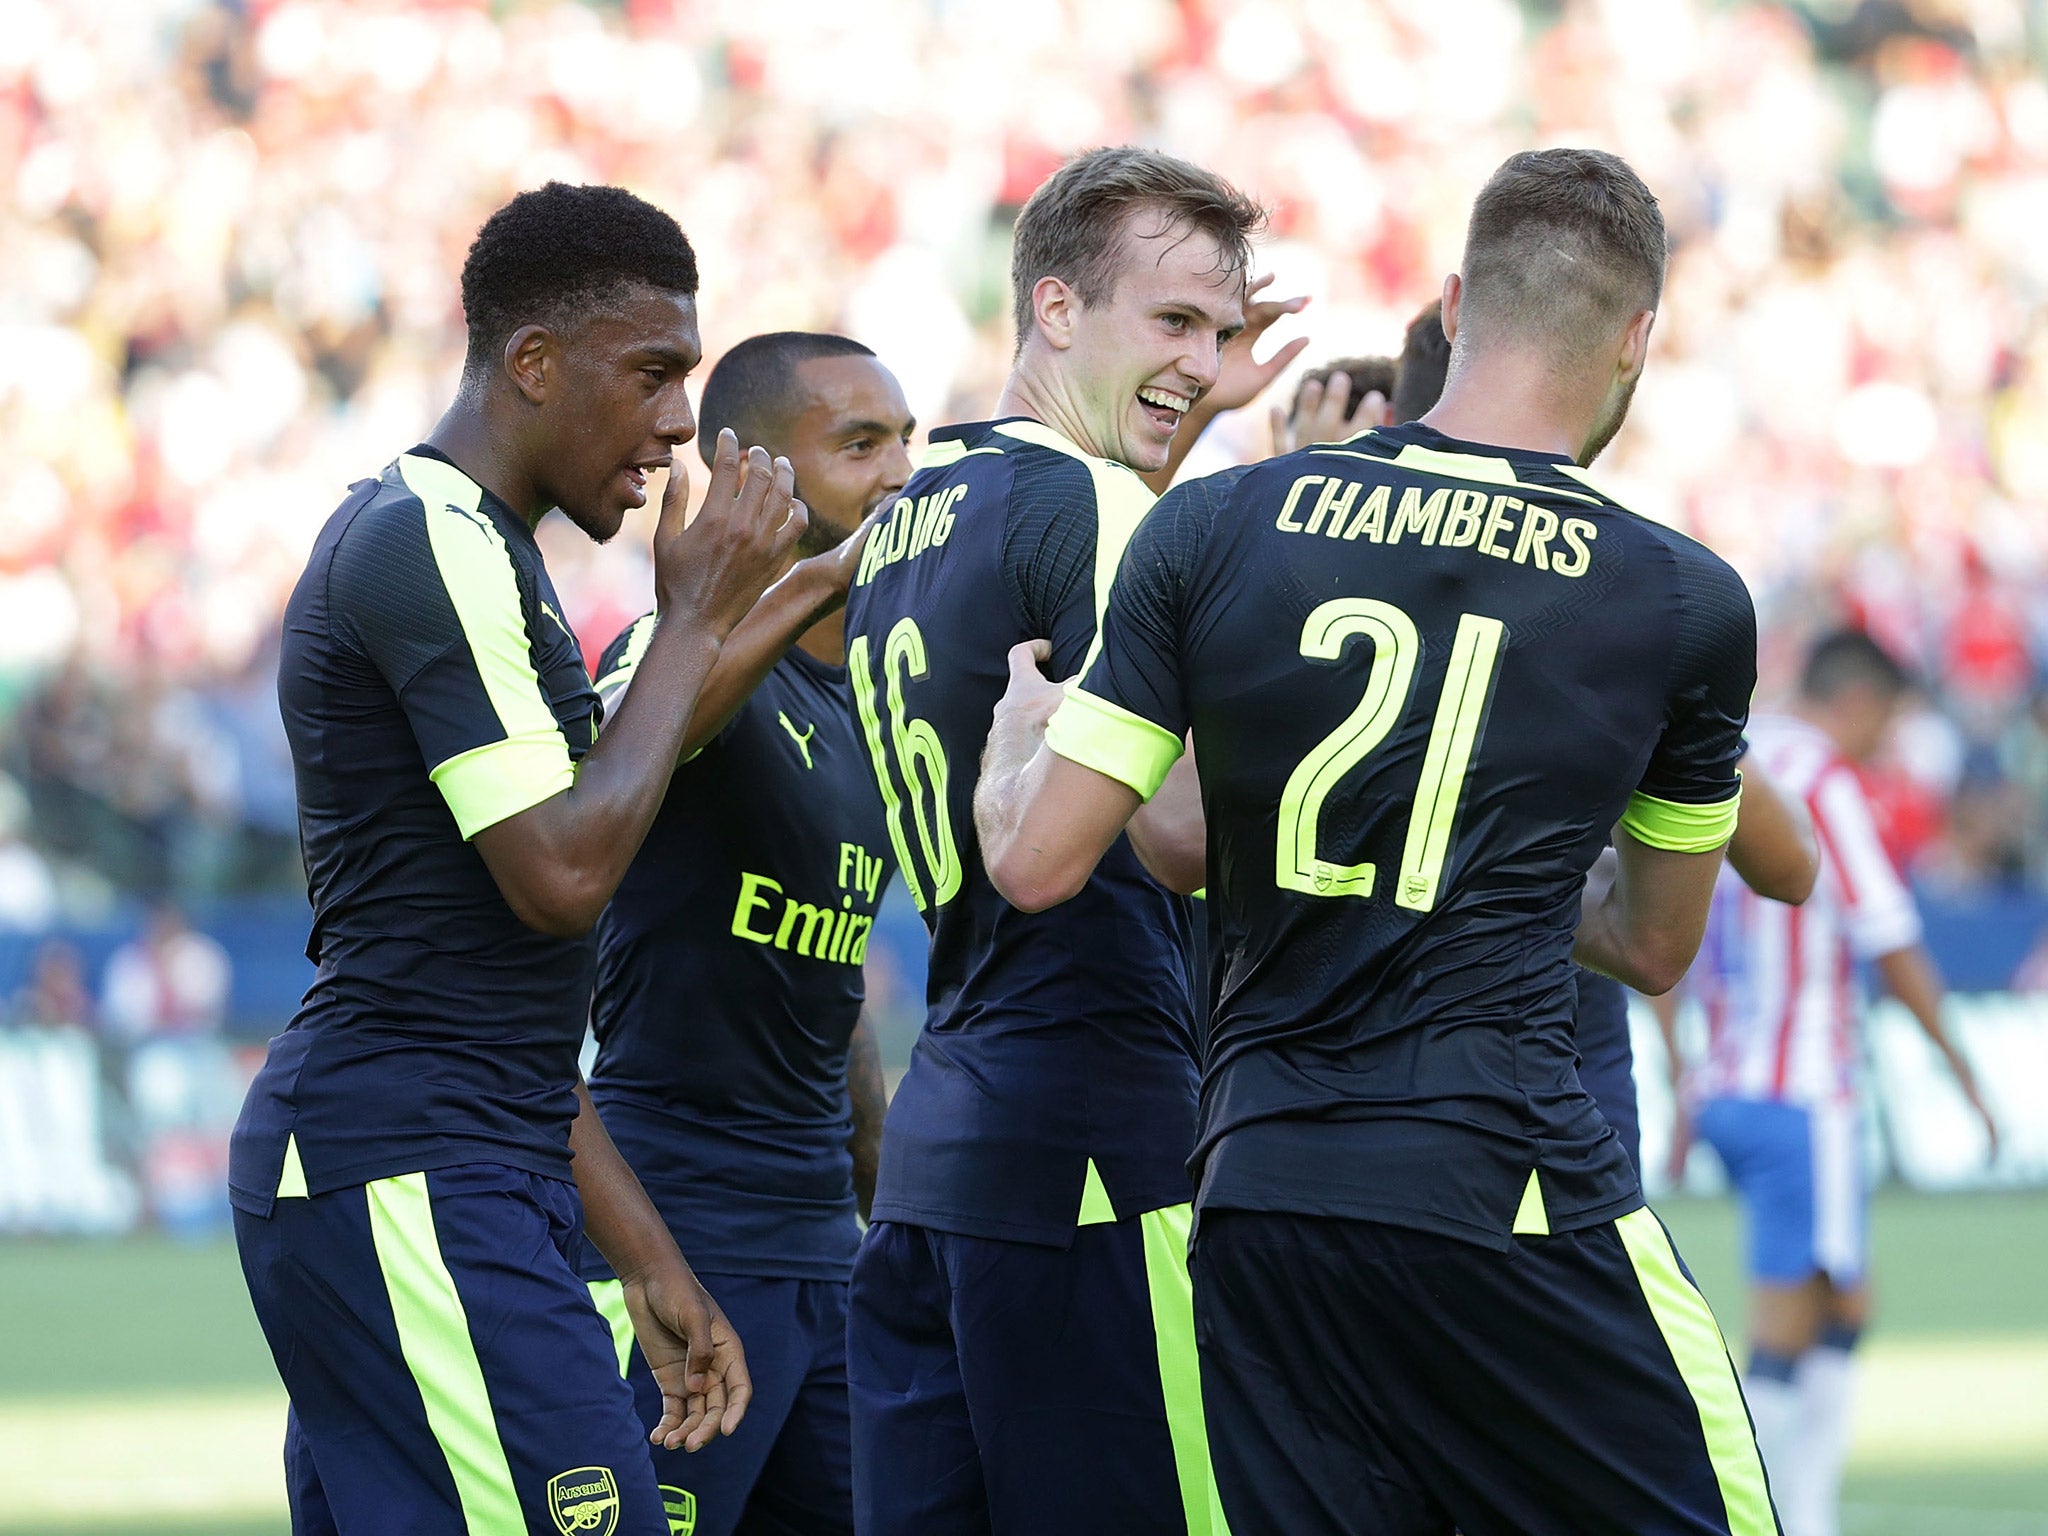 Rob Holding celebrates with Calum Chambers after opening the scoring